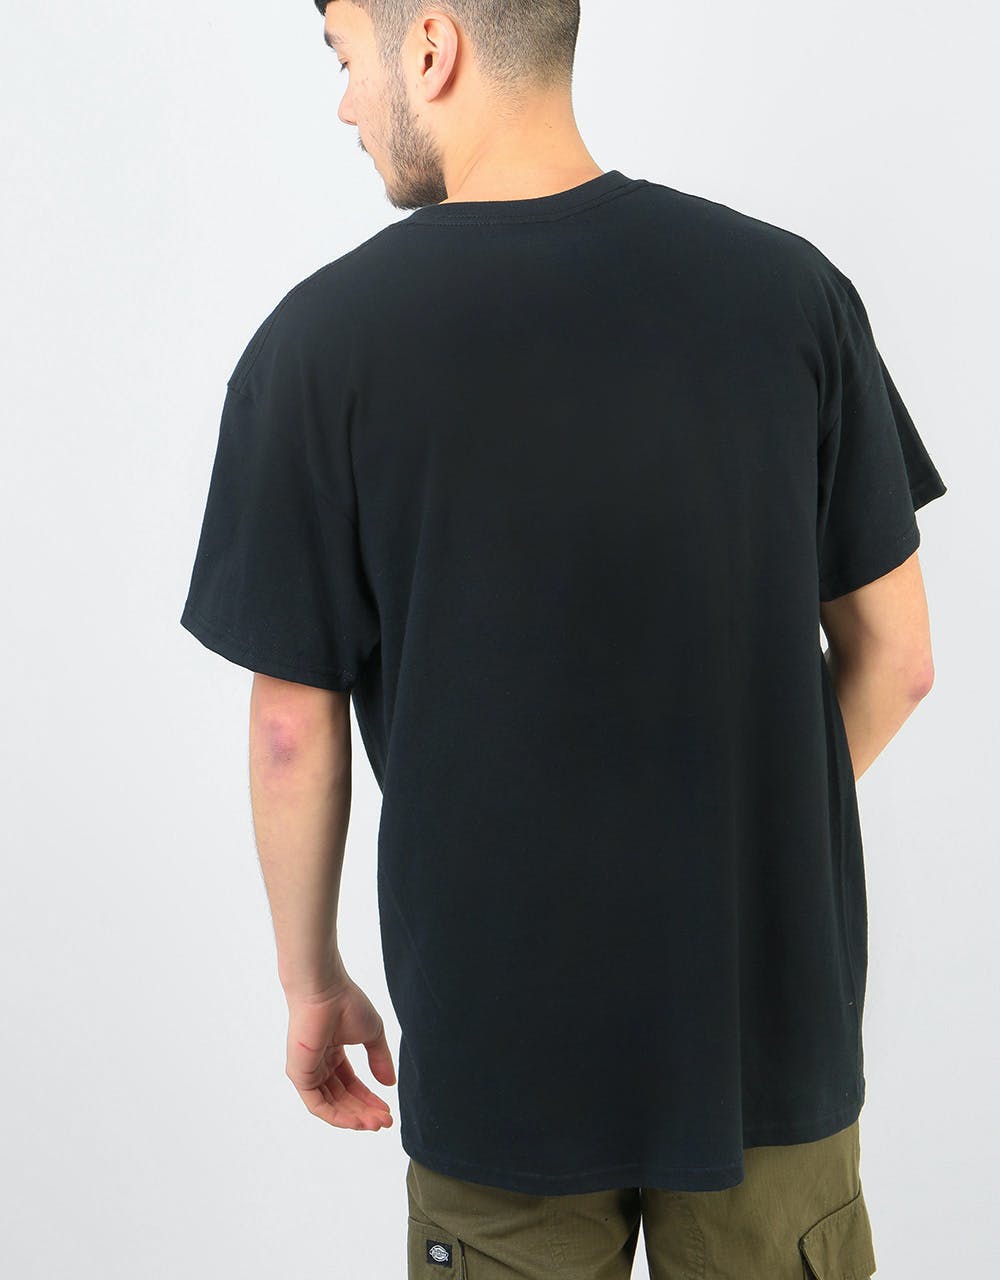 Colourblind Stacked T-Shirt - Black